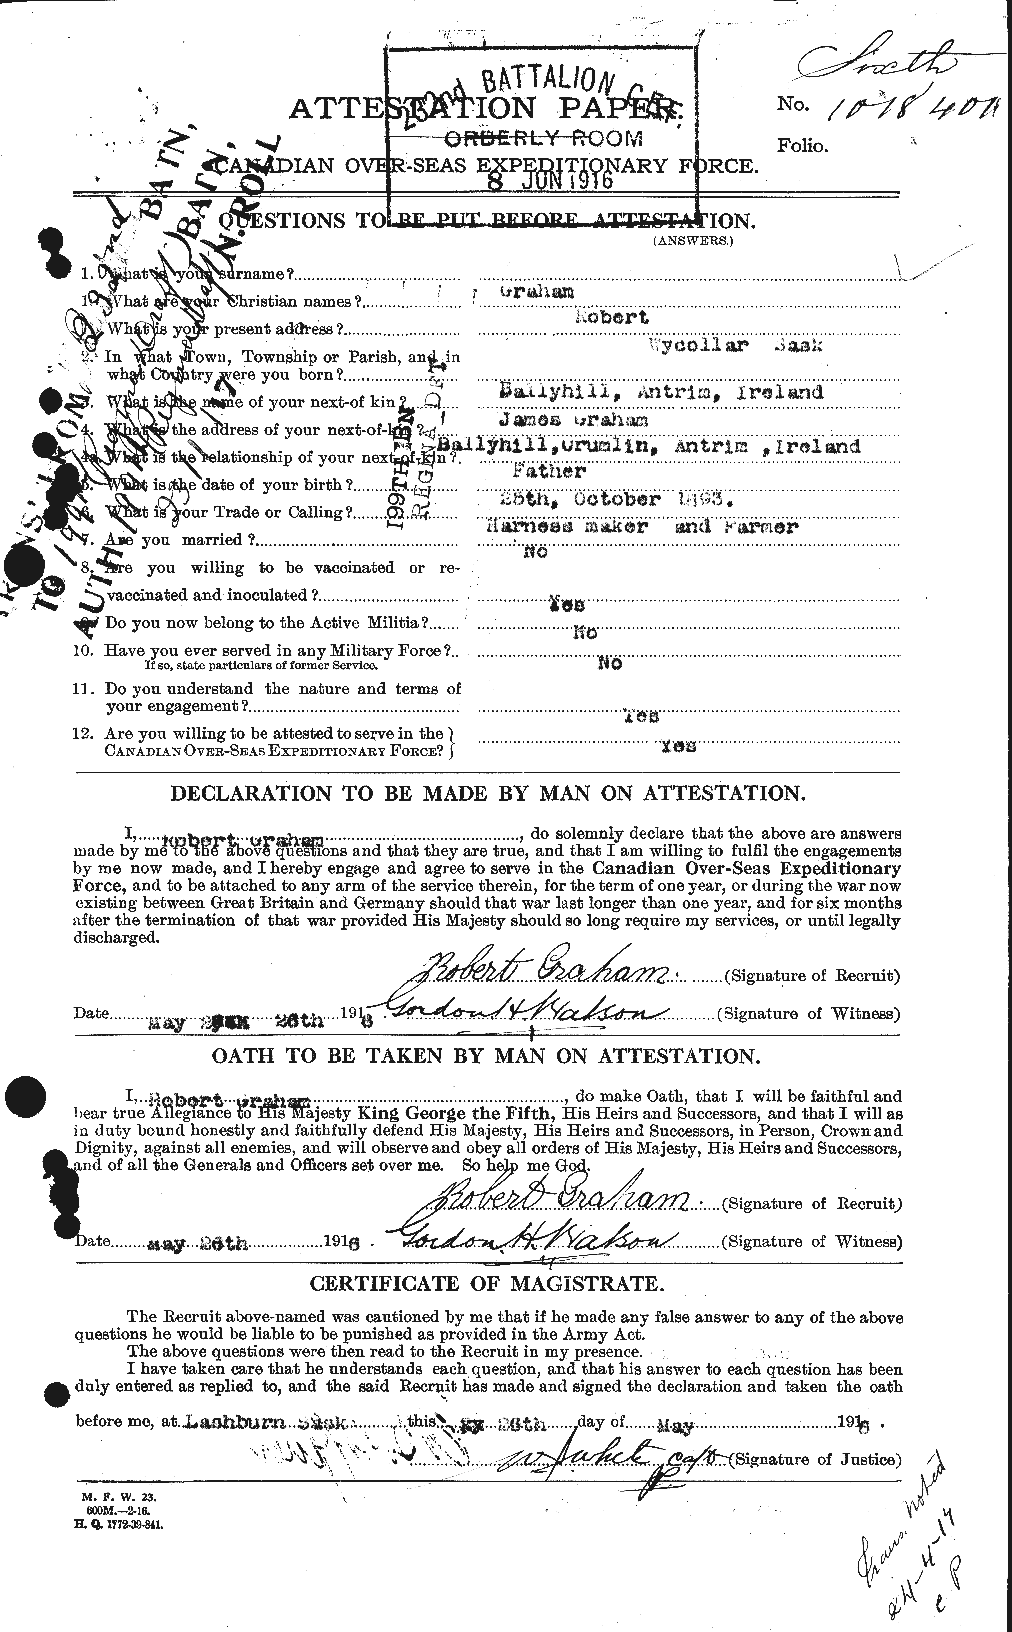 Personnel Records of the First World War - CEF 359387a